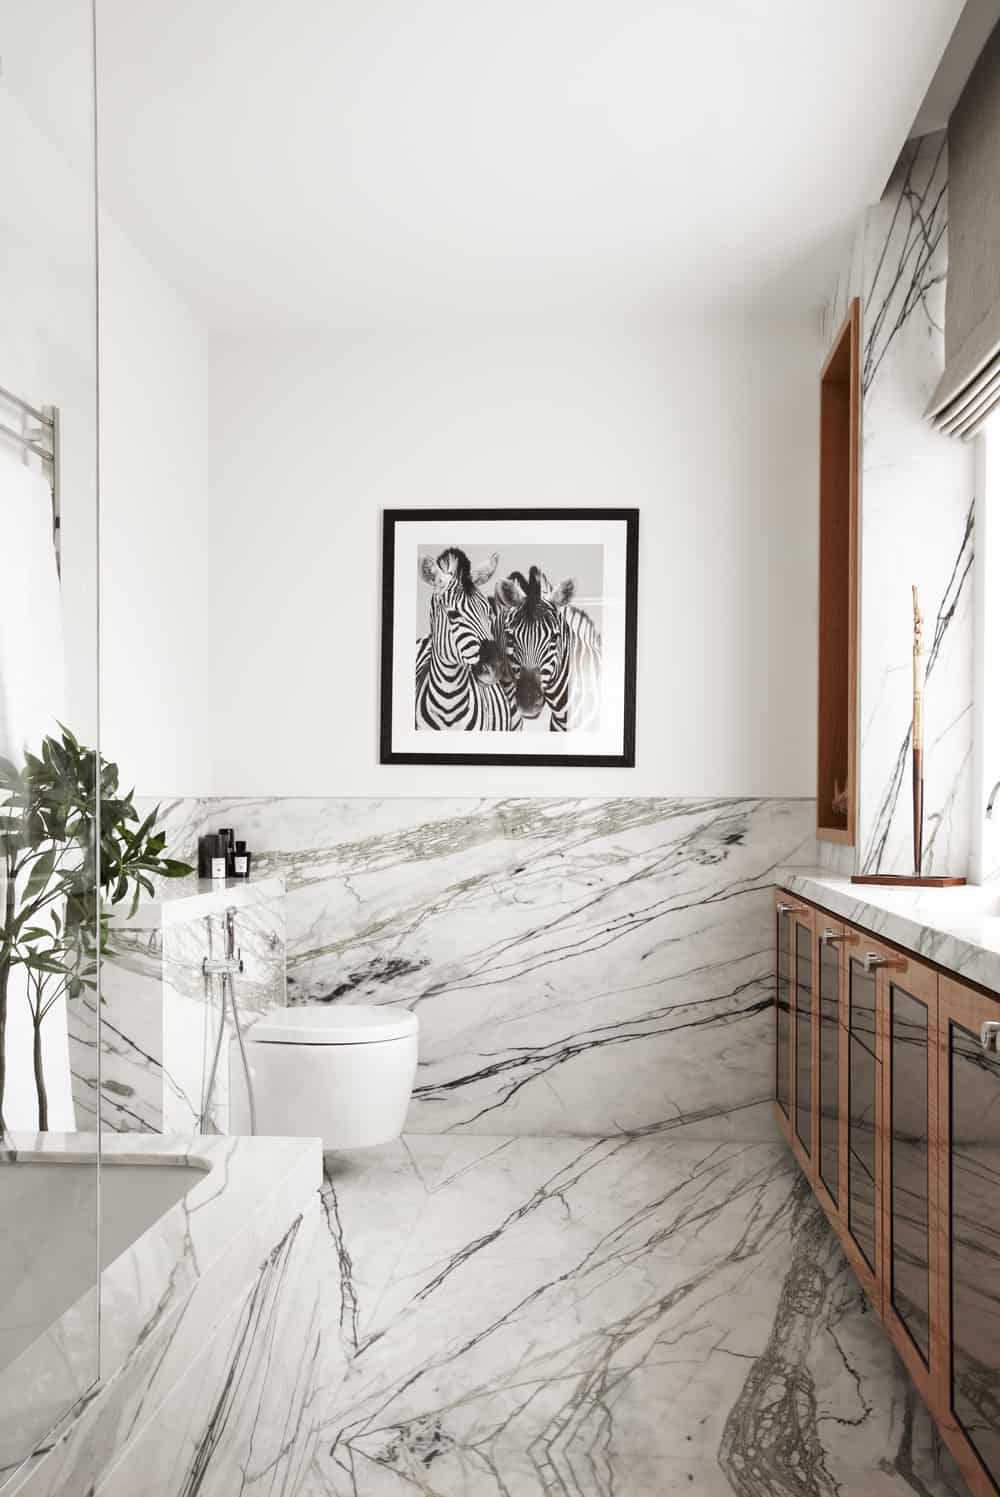 Have a look at this wonderful bathroom ! It makes a bold artistic statement with rich-veined marble all around. This together with the wooden cabinet creates a warm feeling of belongingness. The zebra art and the overall feel is mesmerizing in natural light.